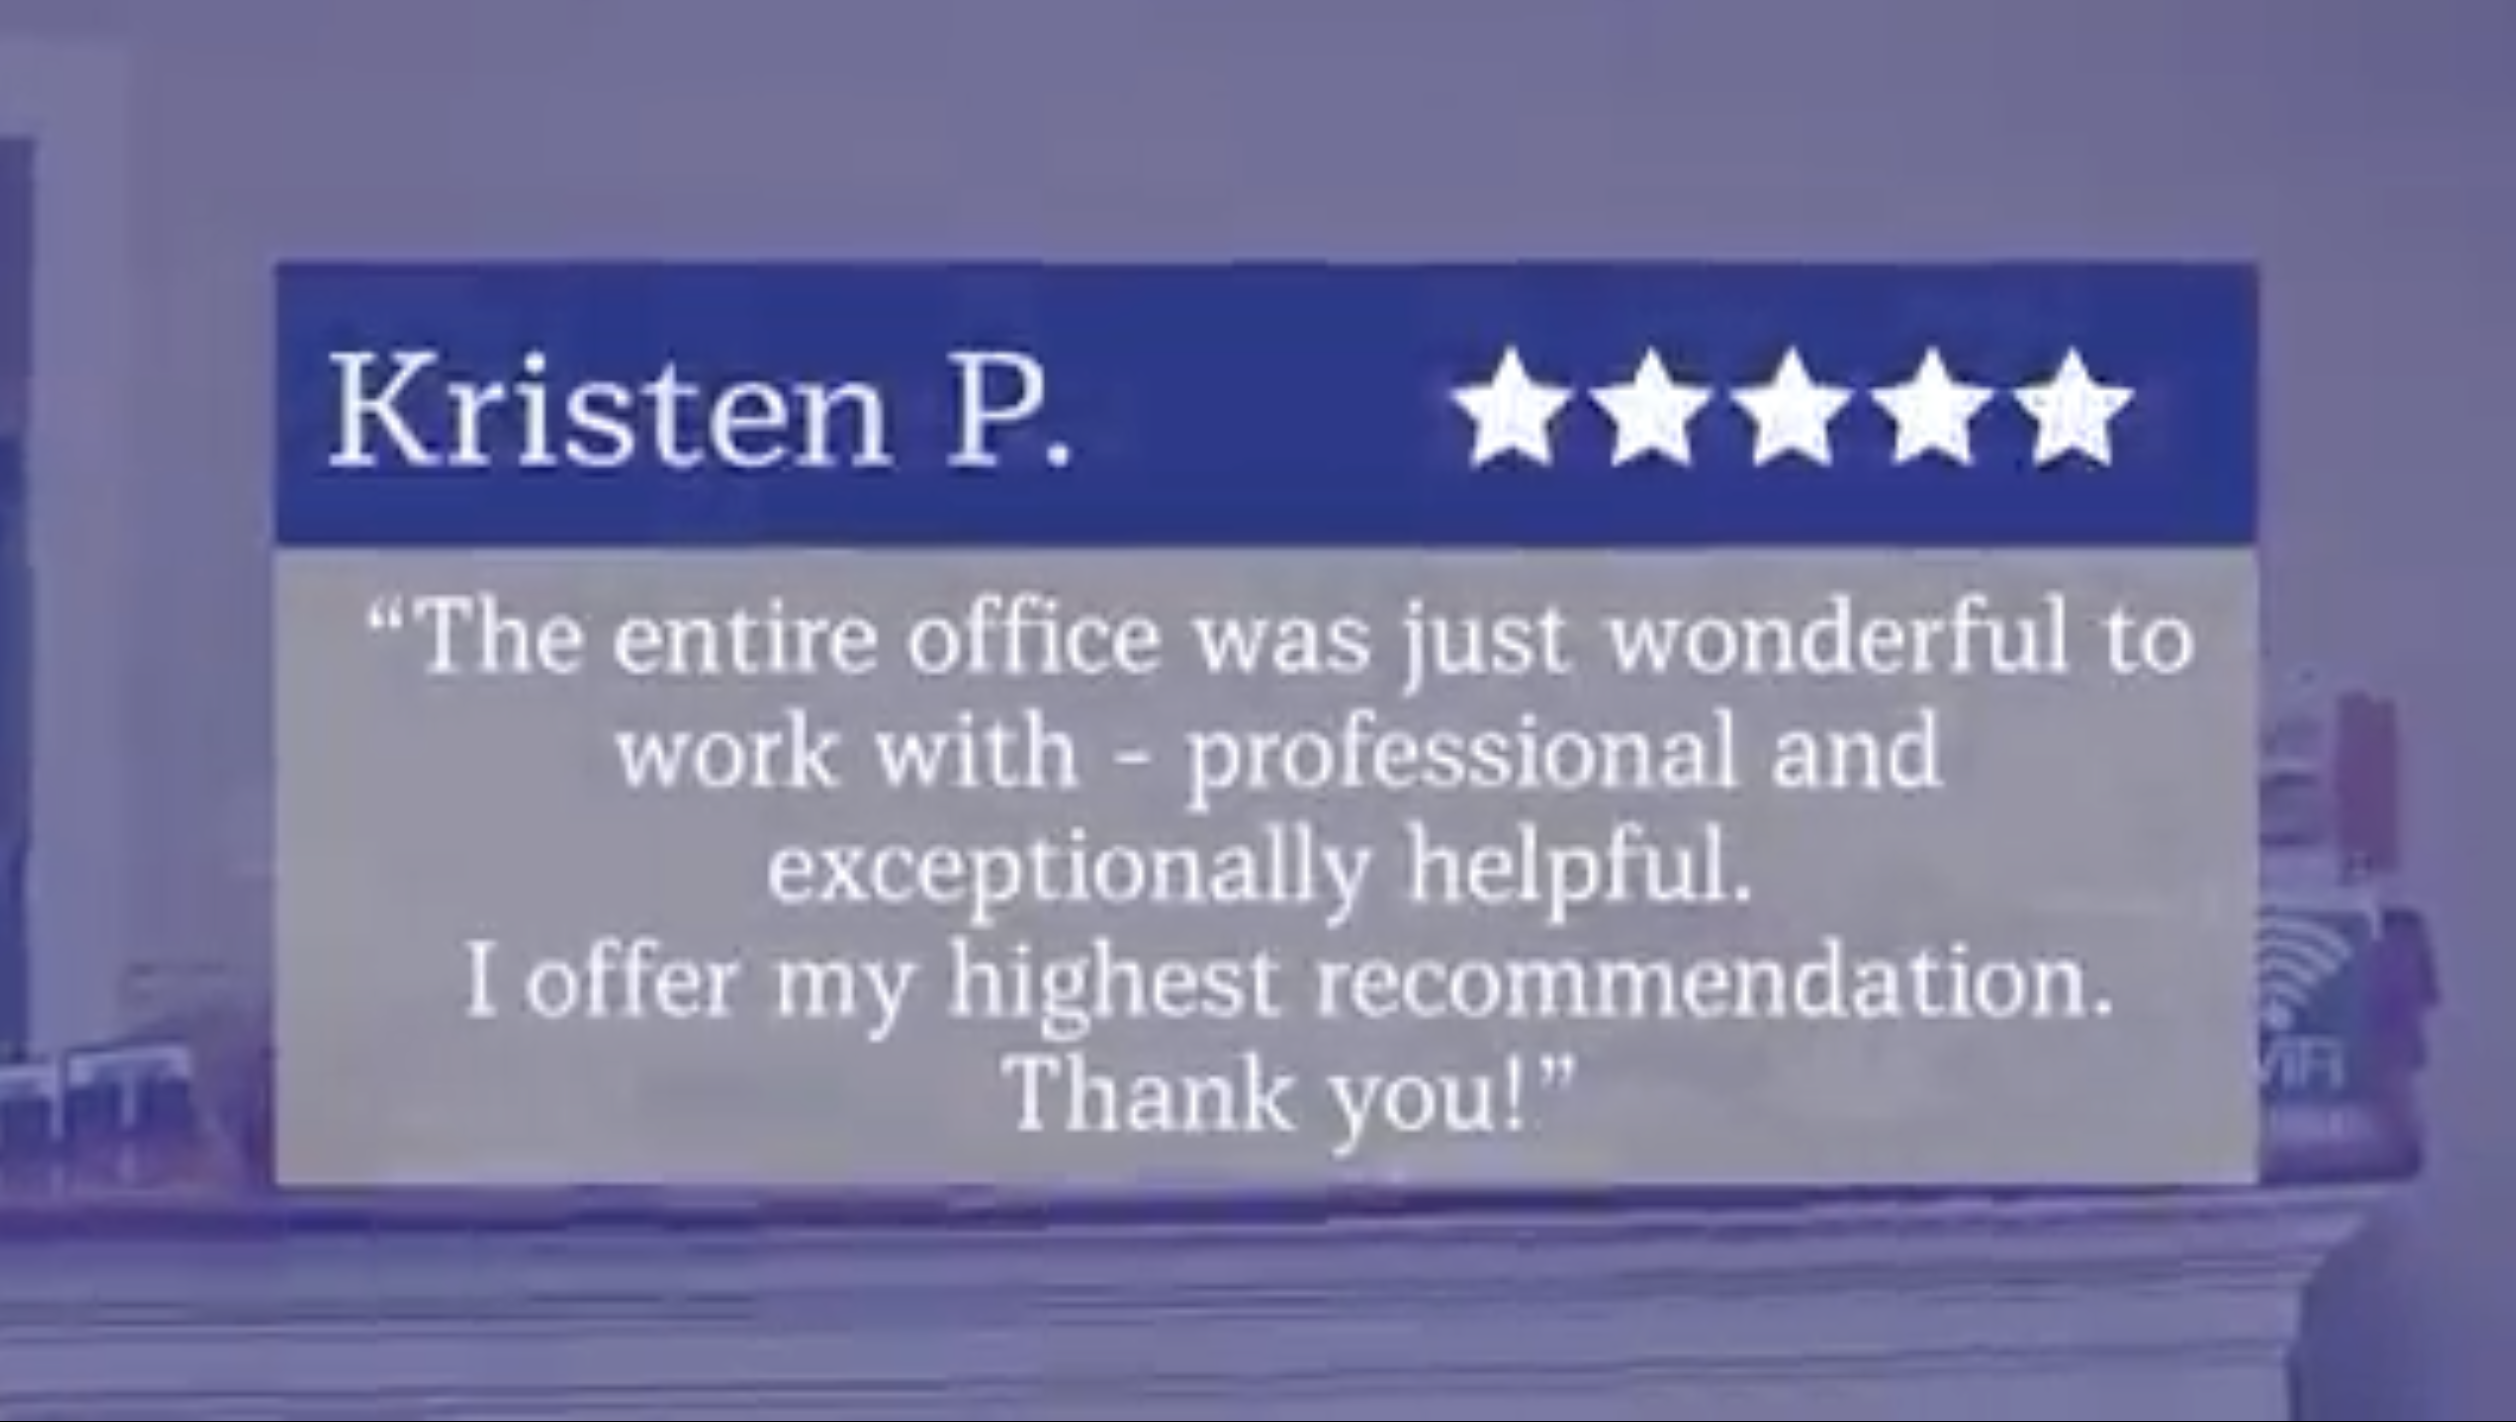 We love hearing from our clients that we've exceeded their expectations!